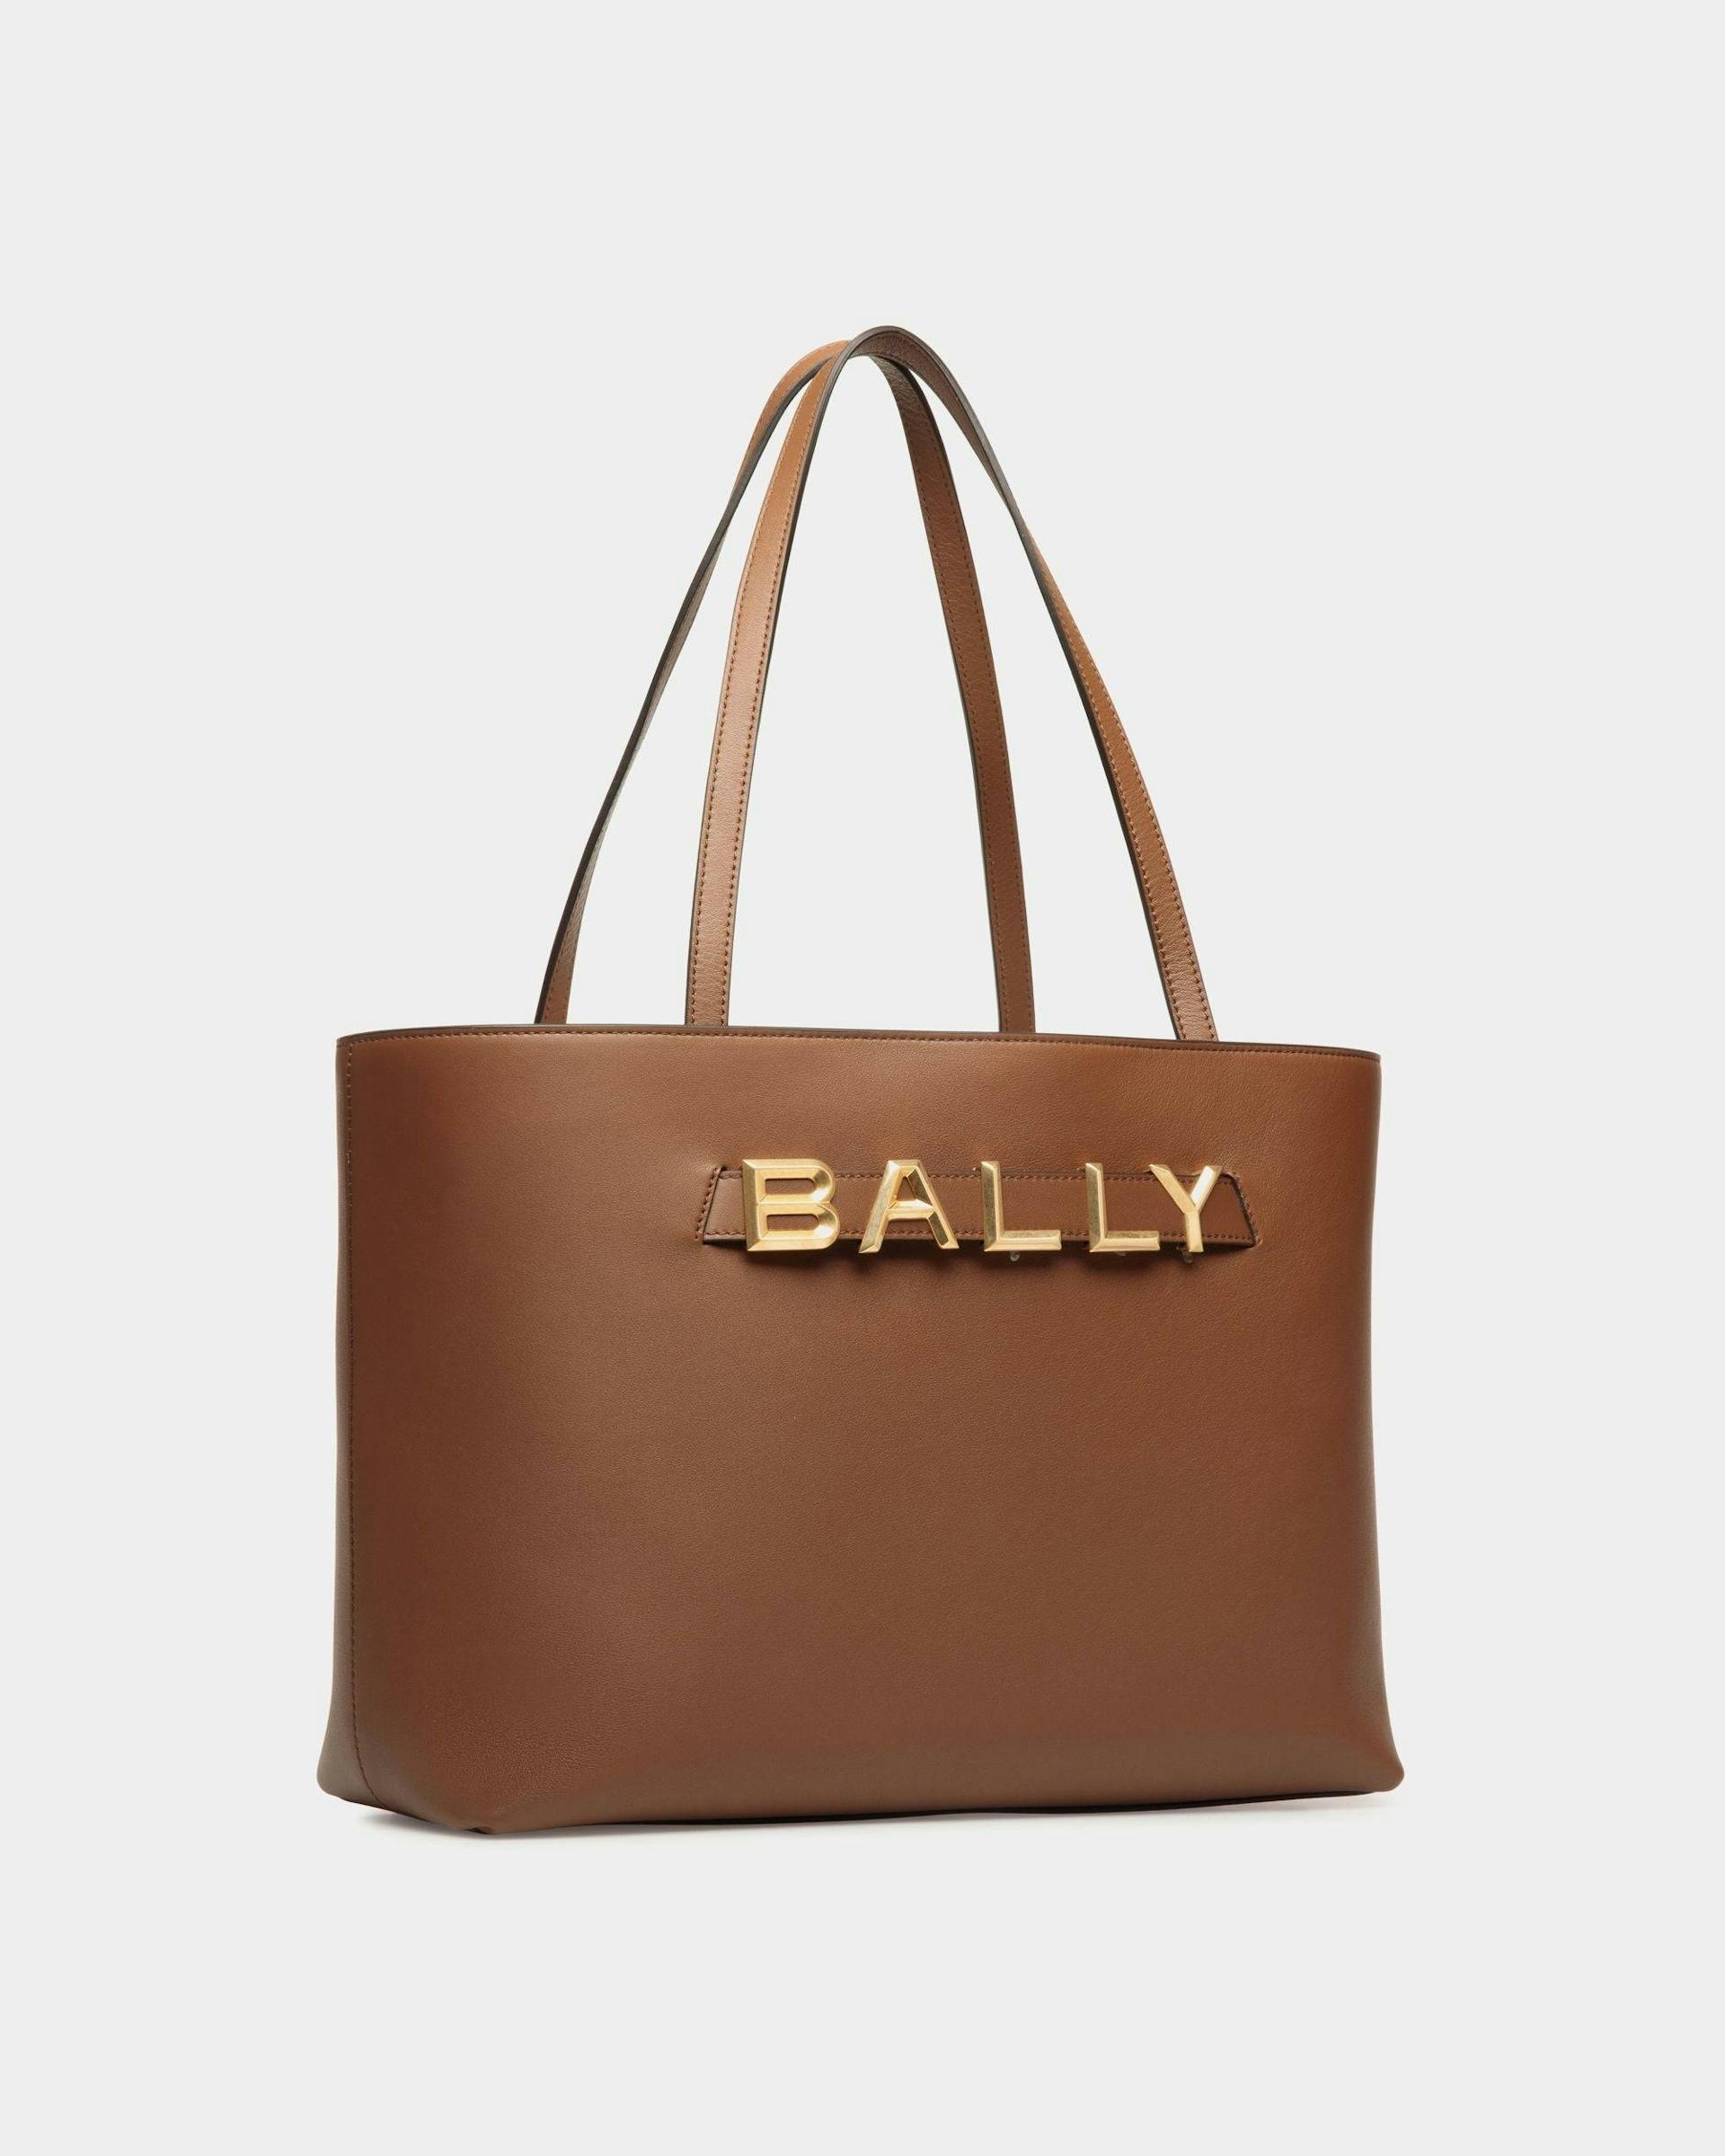 Bally Spell Tote Bag in Brown Leather - Women's - Bally - 03